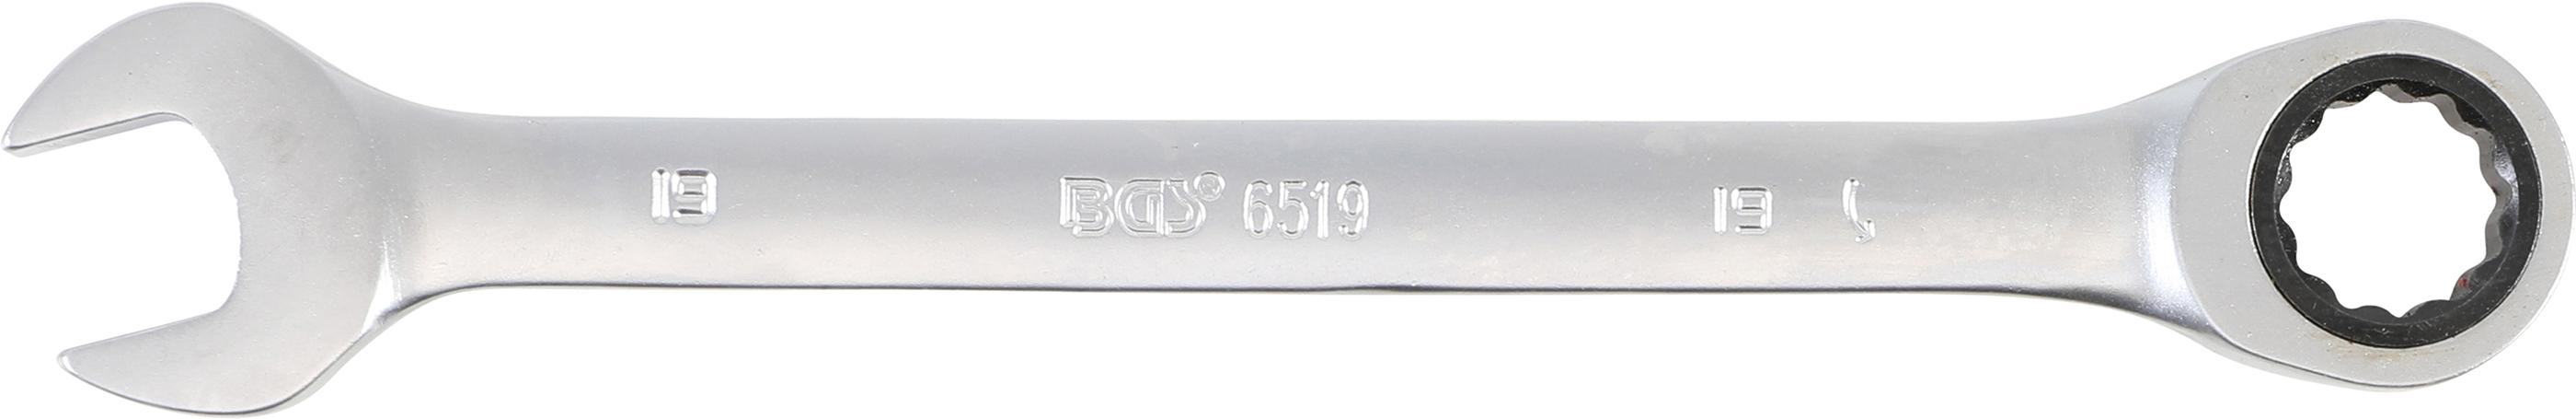 Ratchet Combination Wrench | 19 mm (6519)